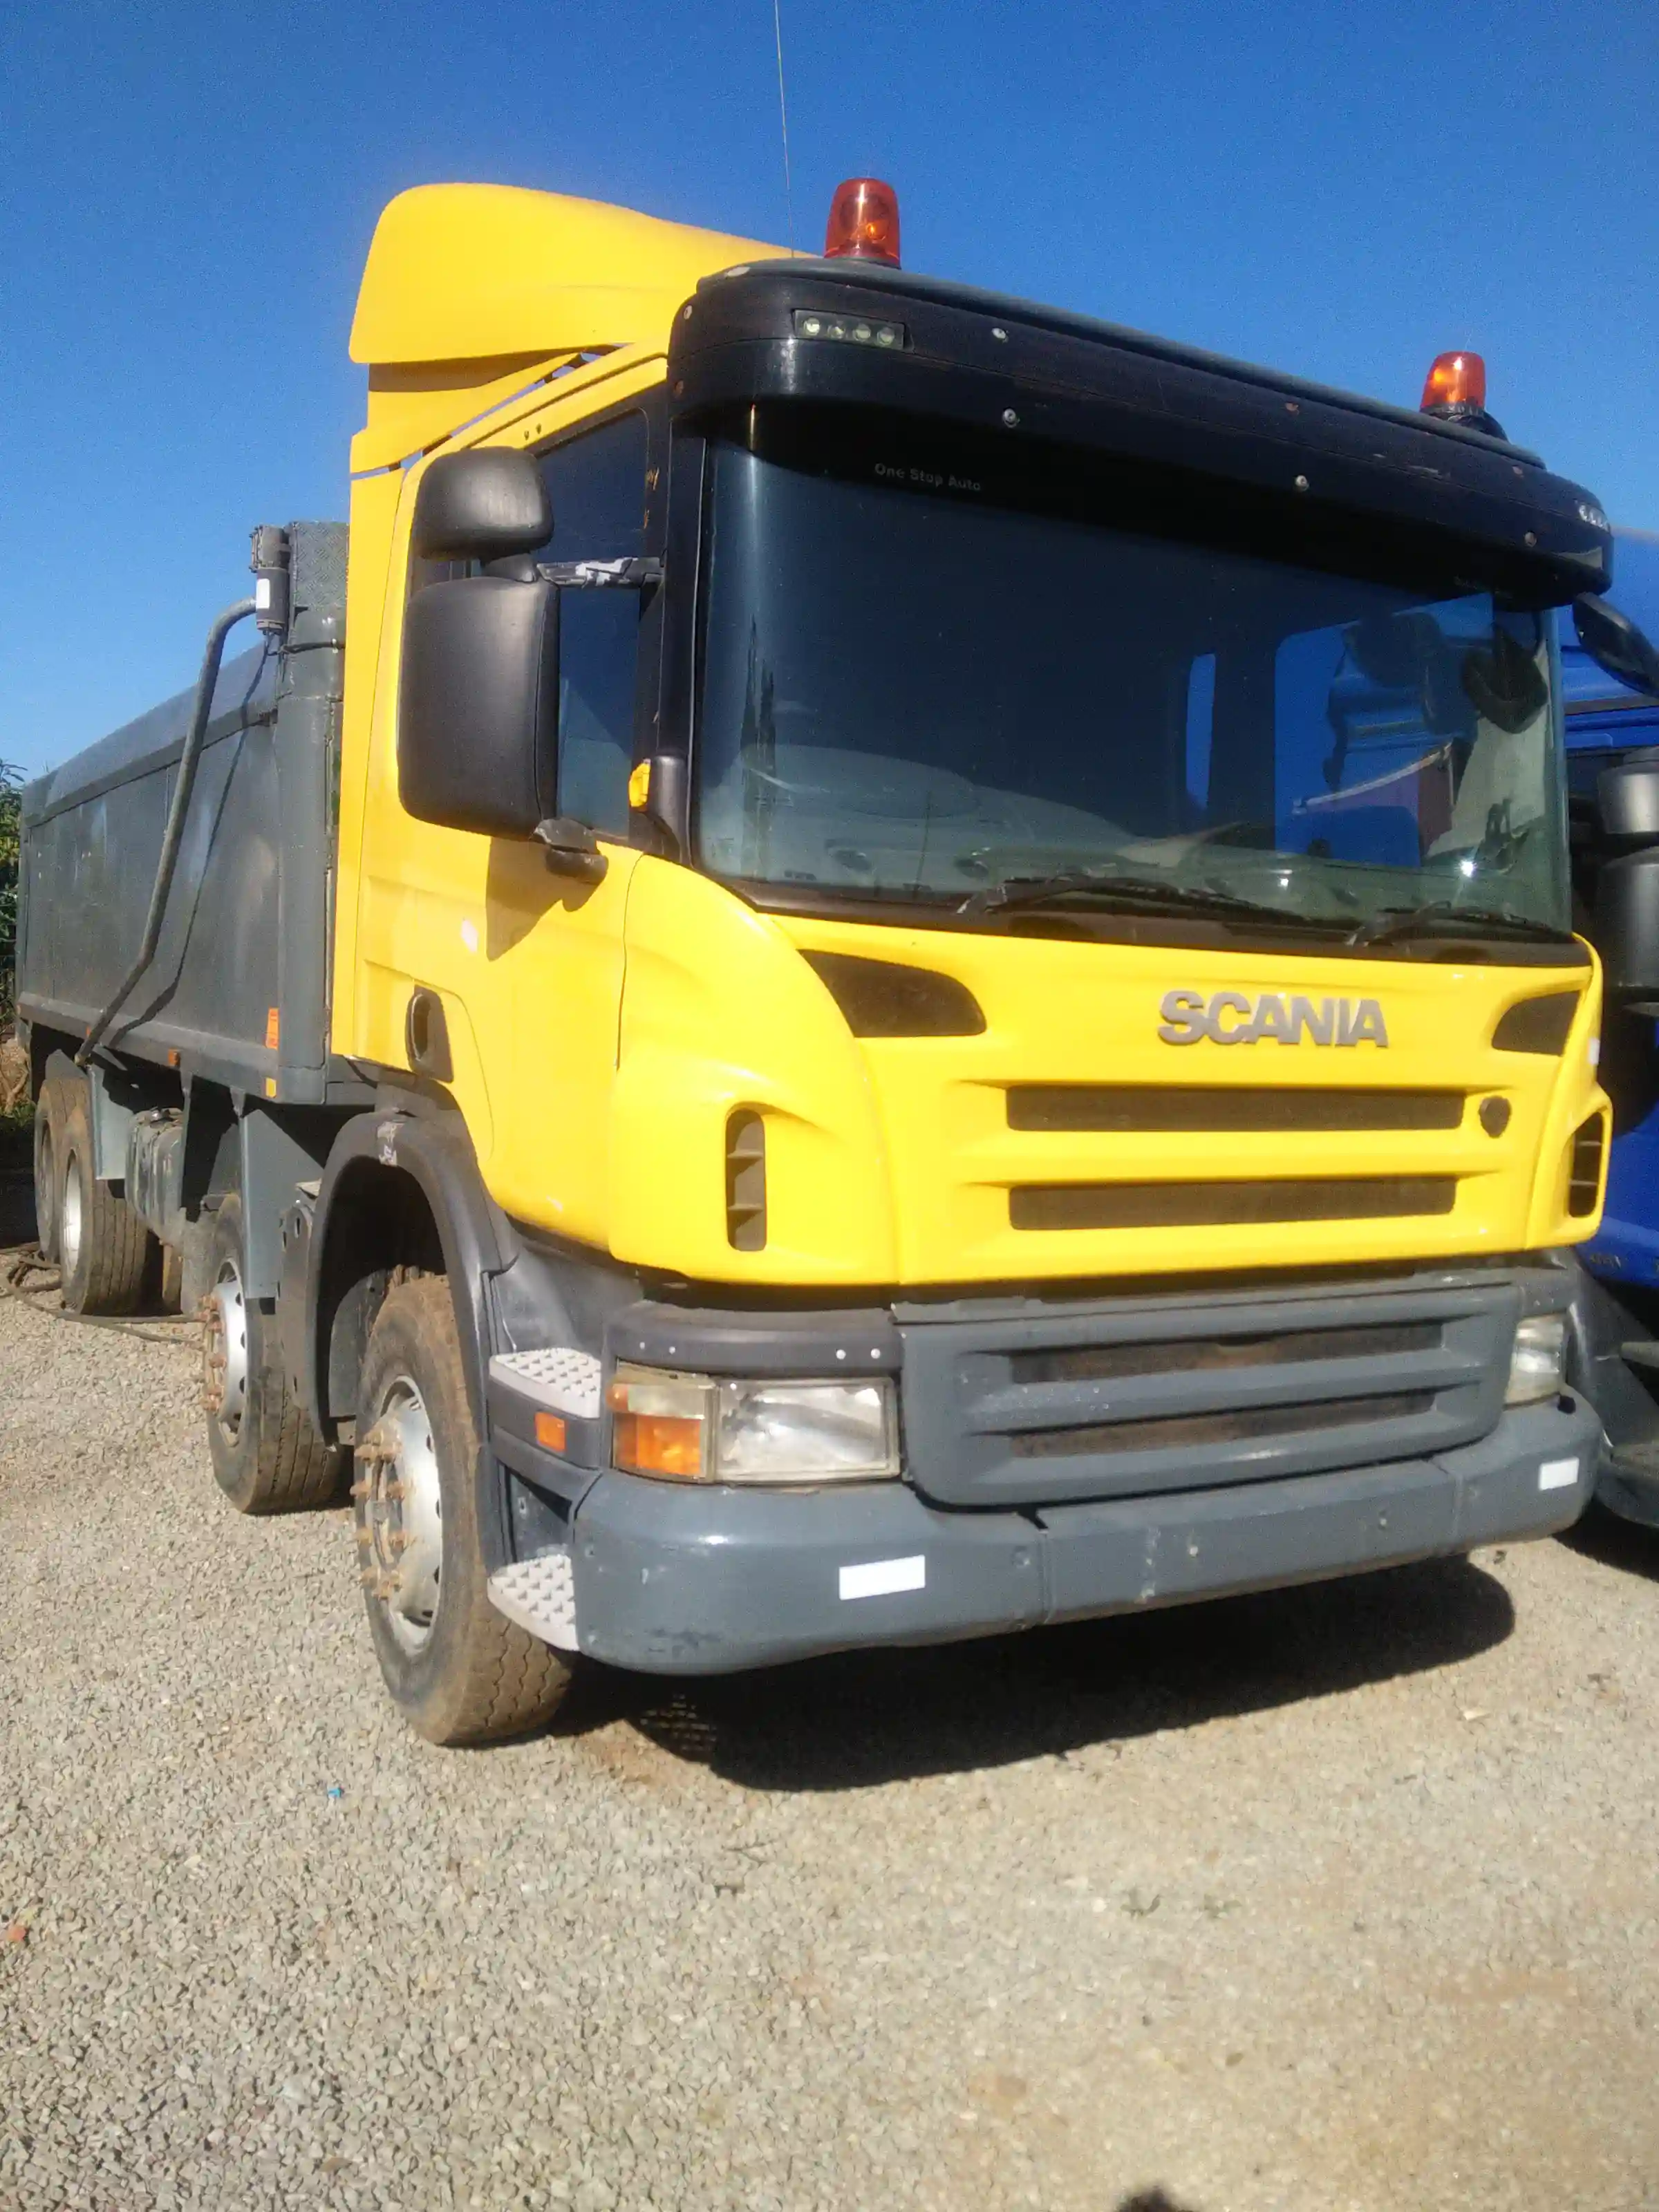 SCANIA TIPPER FOR SALE